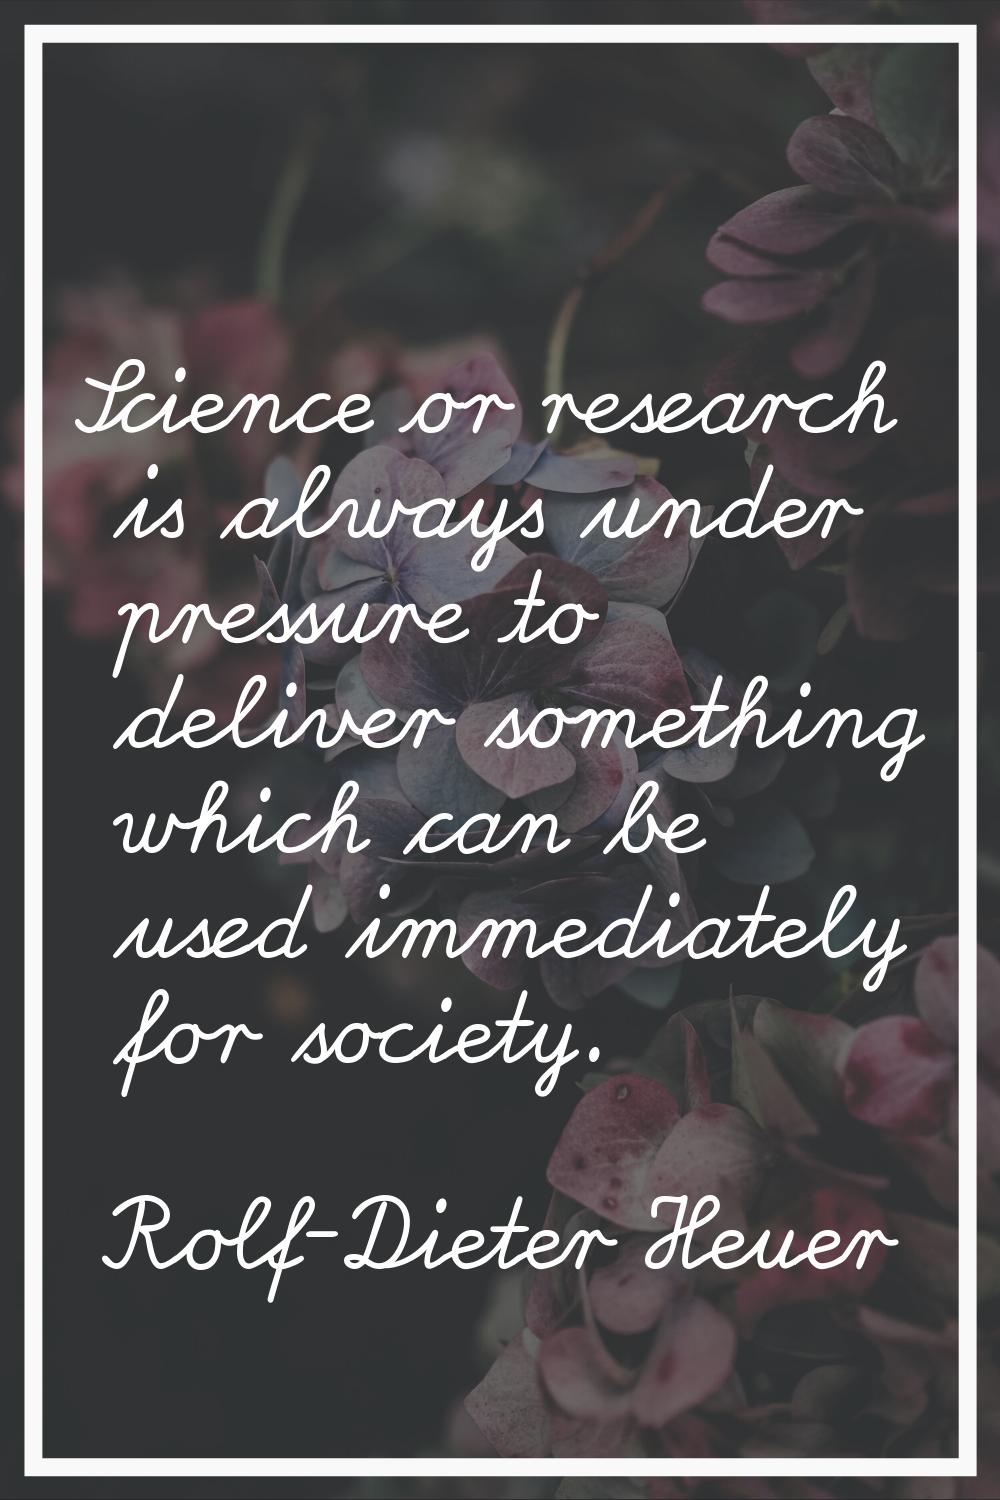 Science or research is always under pressure to deliver something which can be used immediately for